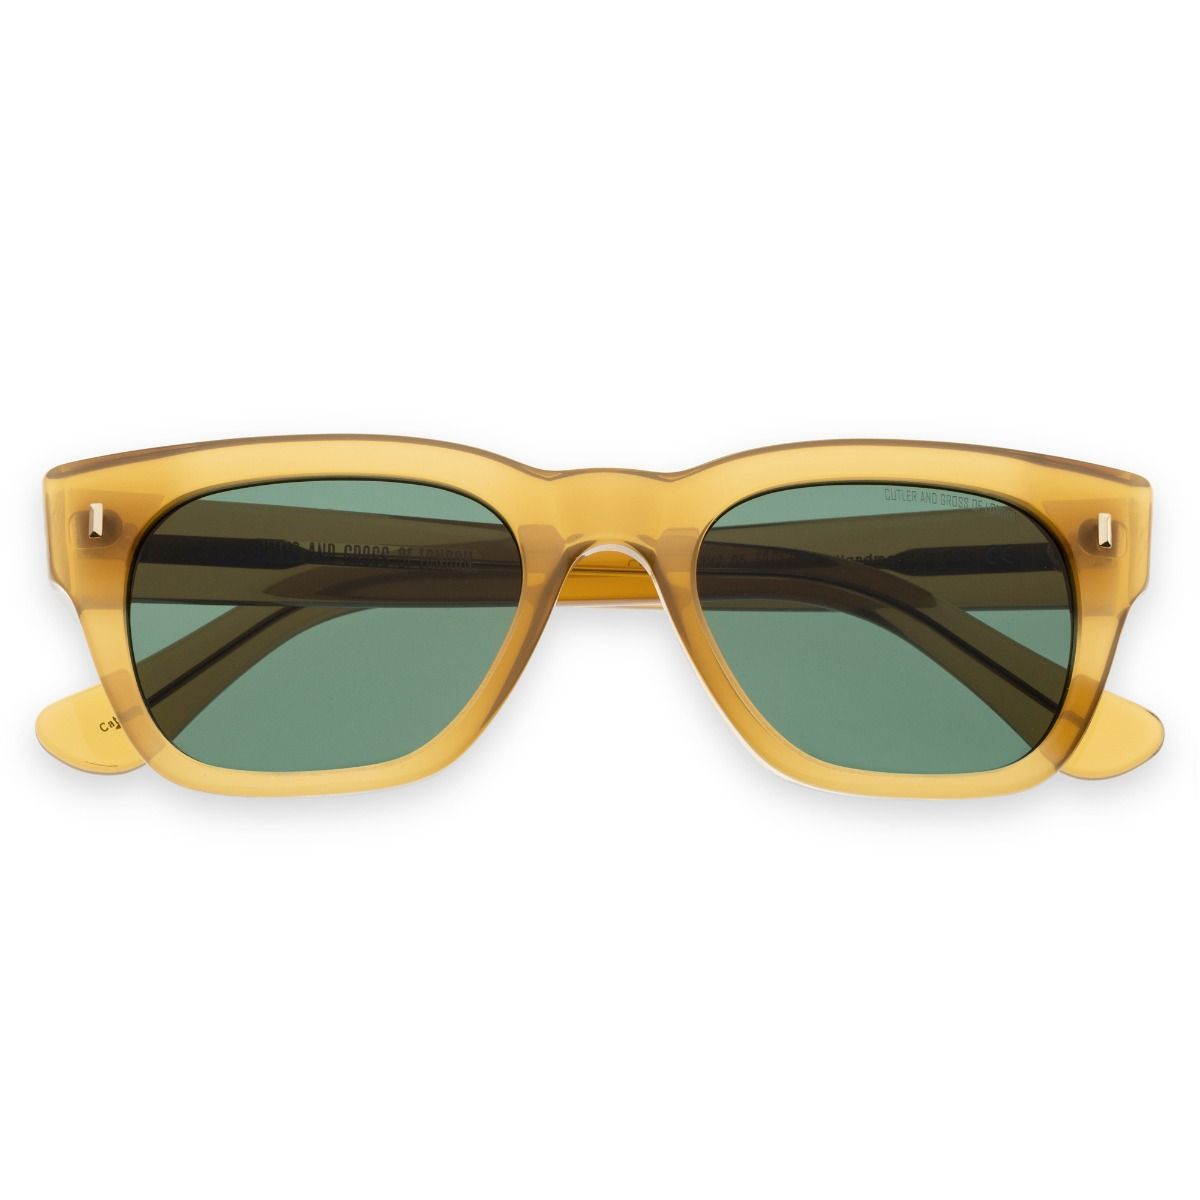 0772 V2 Square Sunglasses - Butterscotch by Cutler and Gross